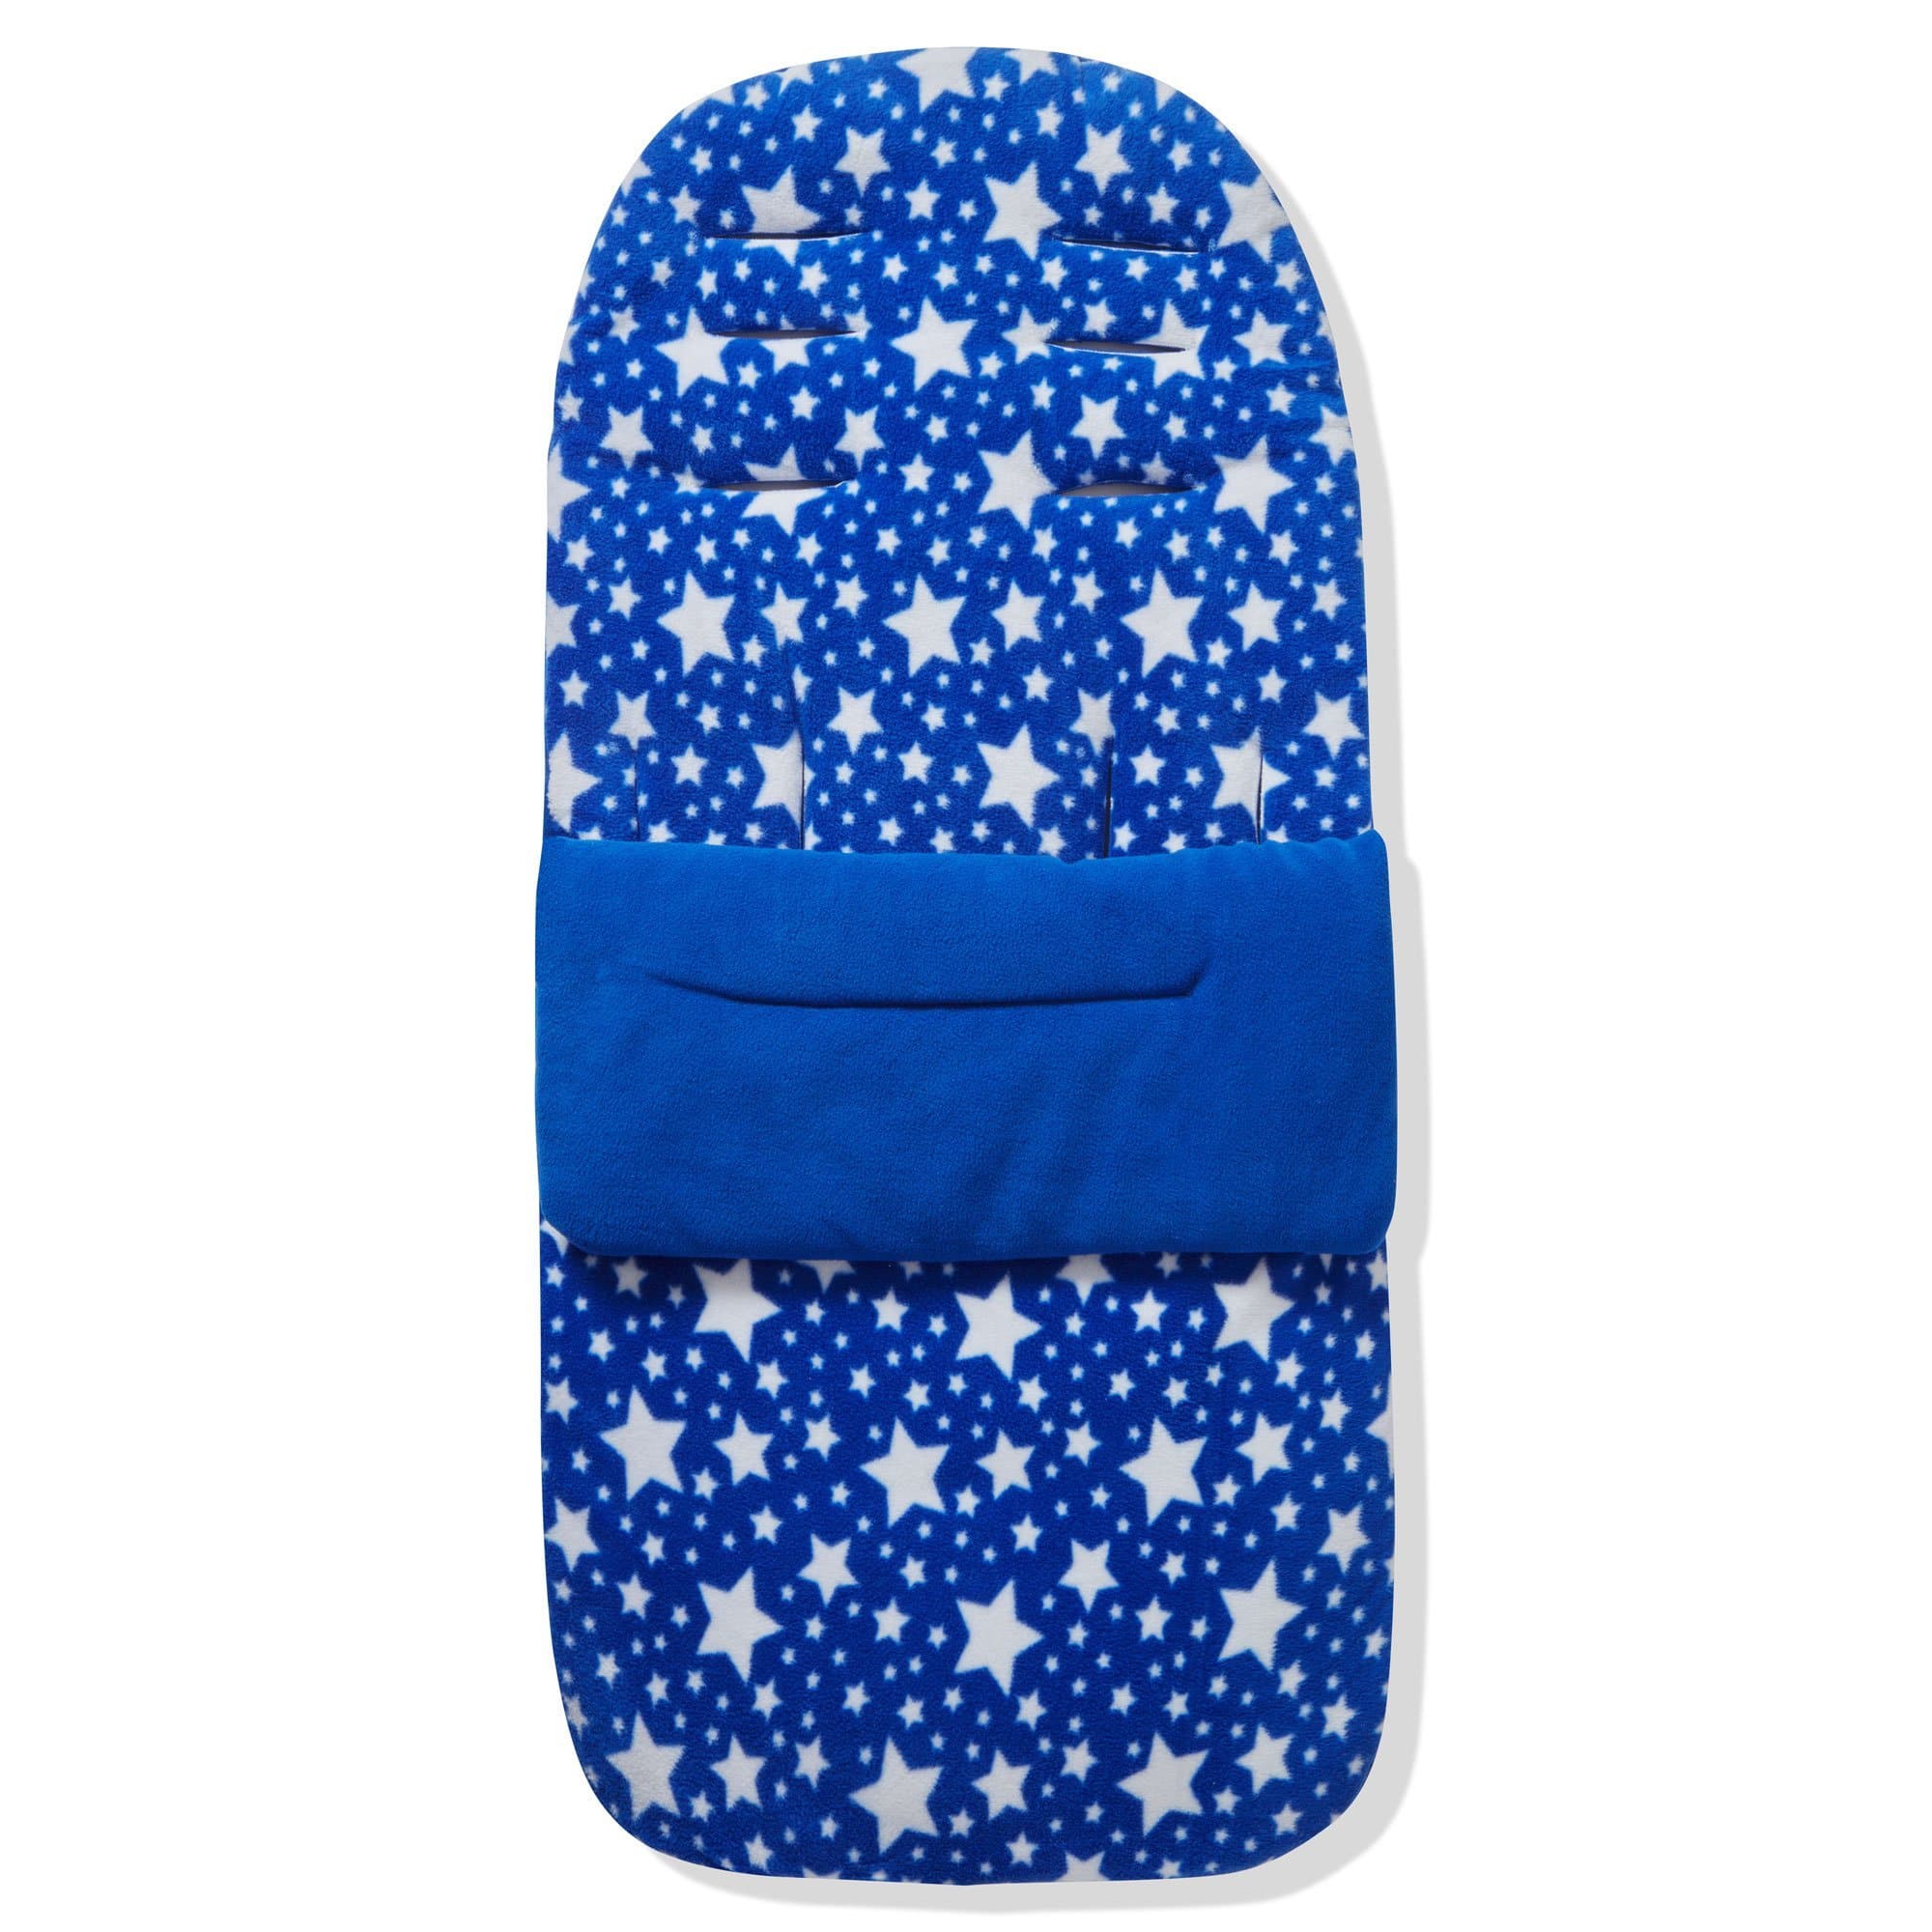 Fleece Footmuff / Cosy Toes Compatible With Cam - Blue Star / Fits All Models | For Your Little One